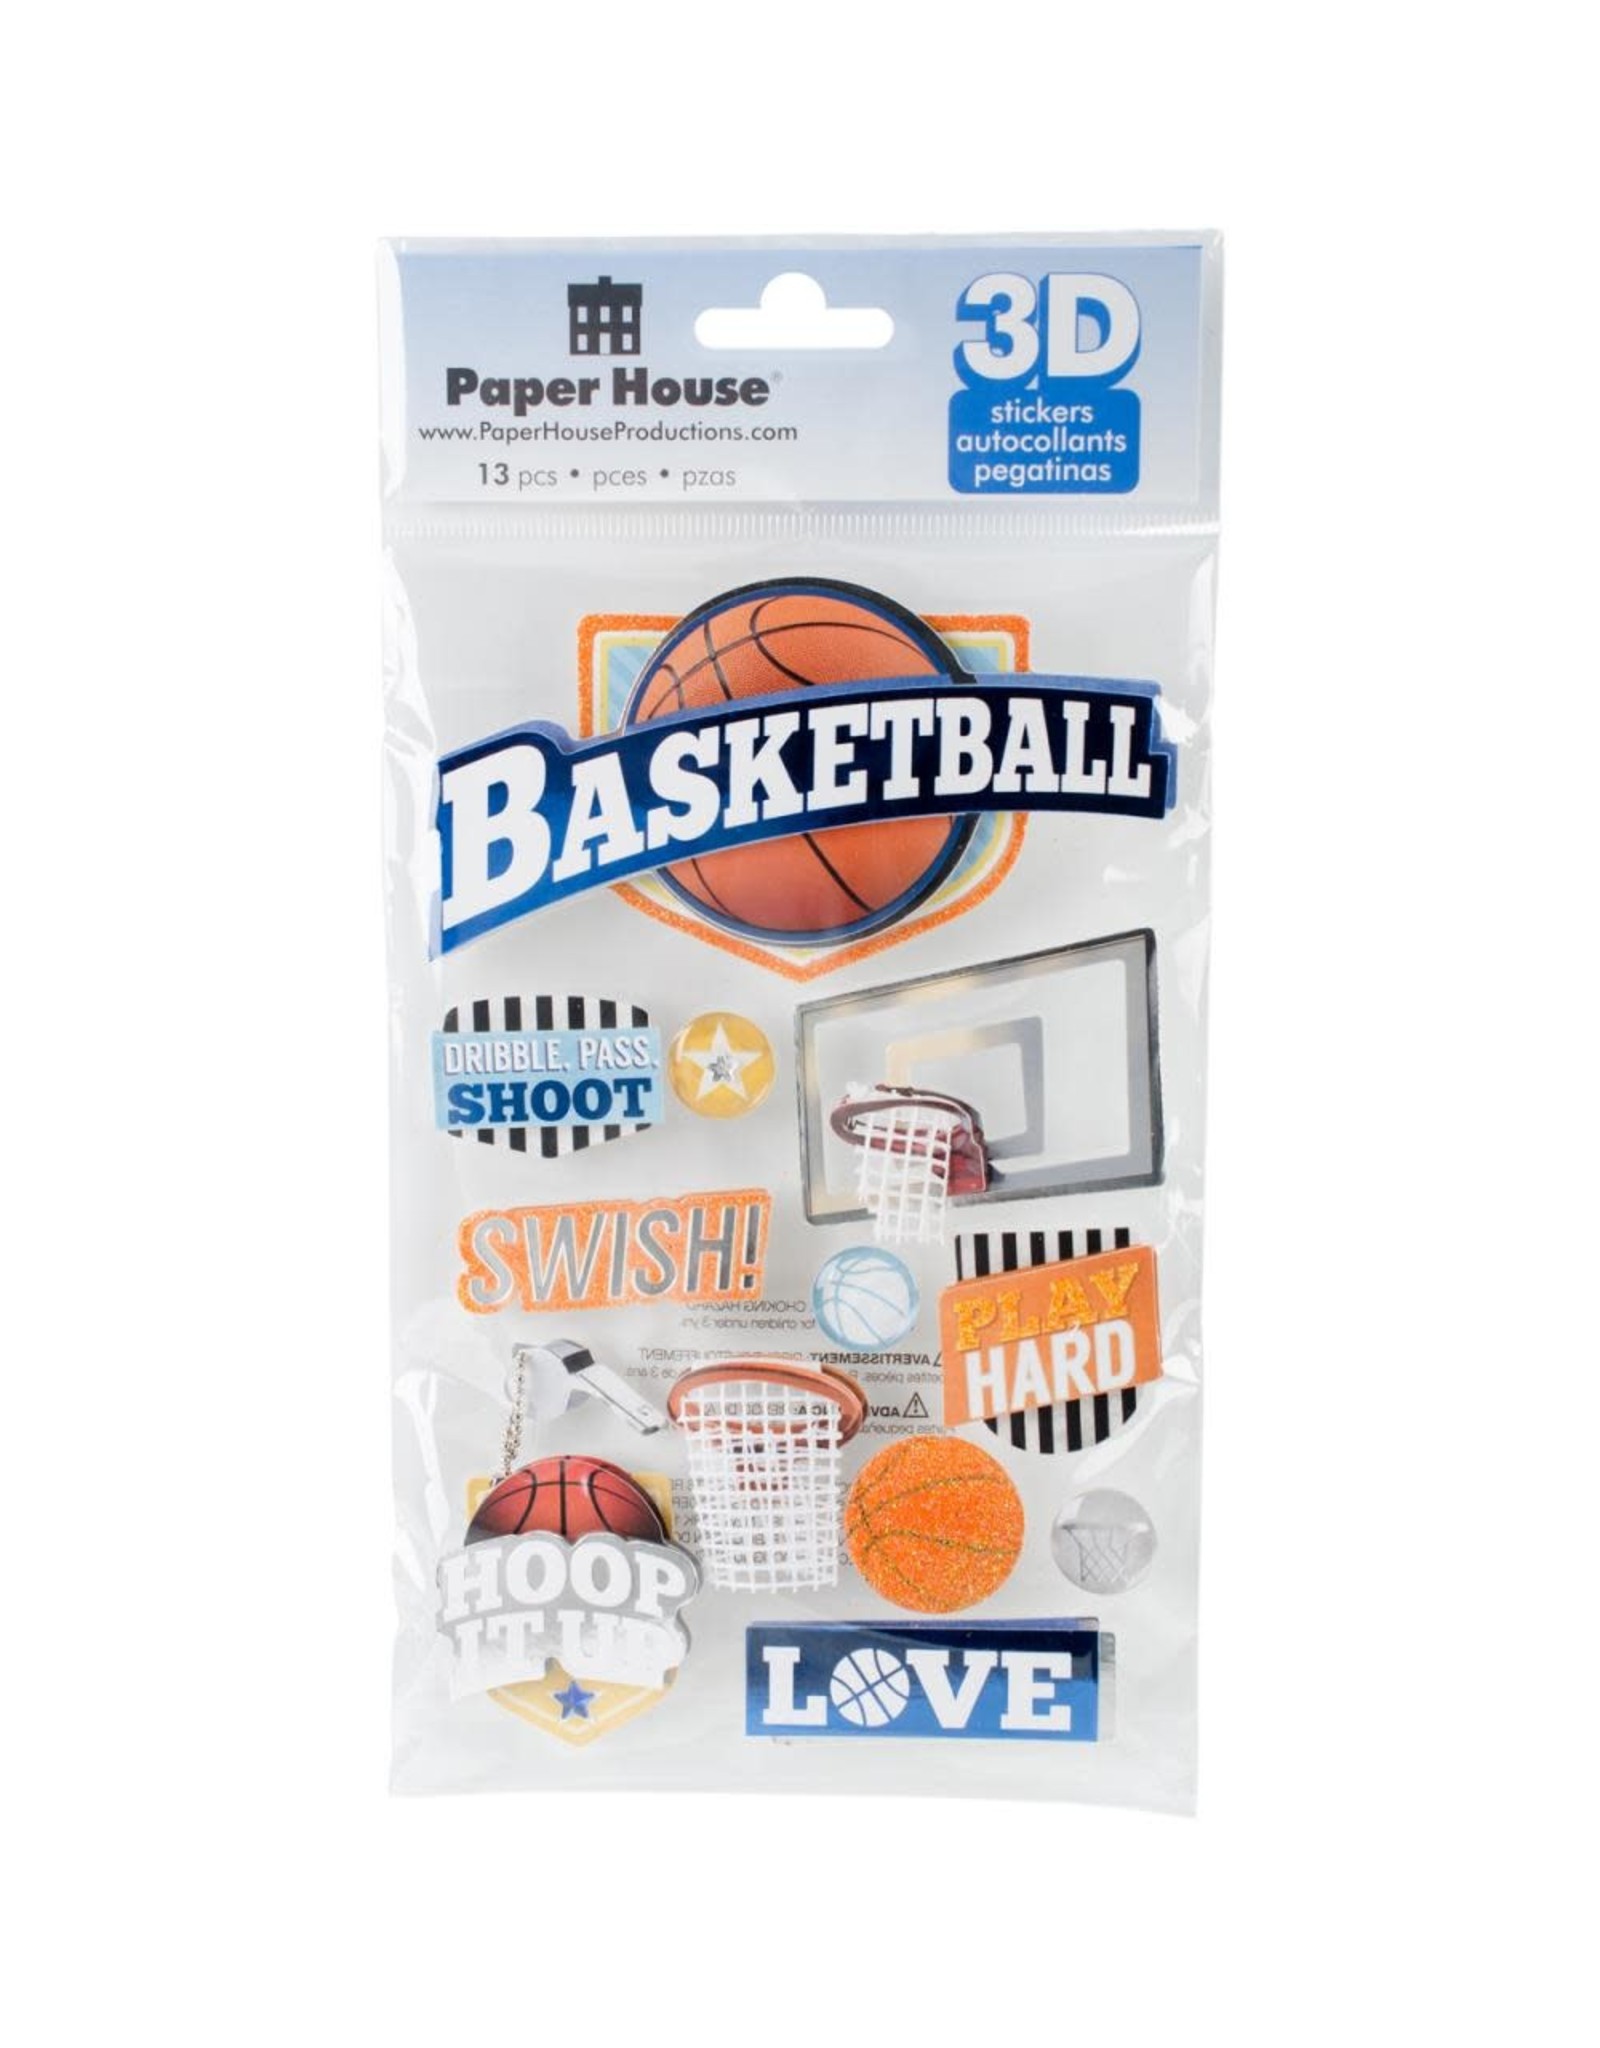 PAPER HOUSE PRODUCTIONS PAPER HOUSE BASKETBALL SWISH 3D STICKERS